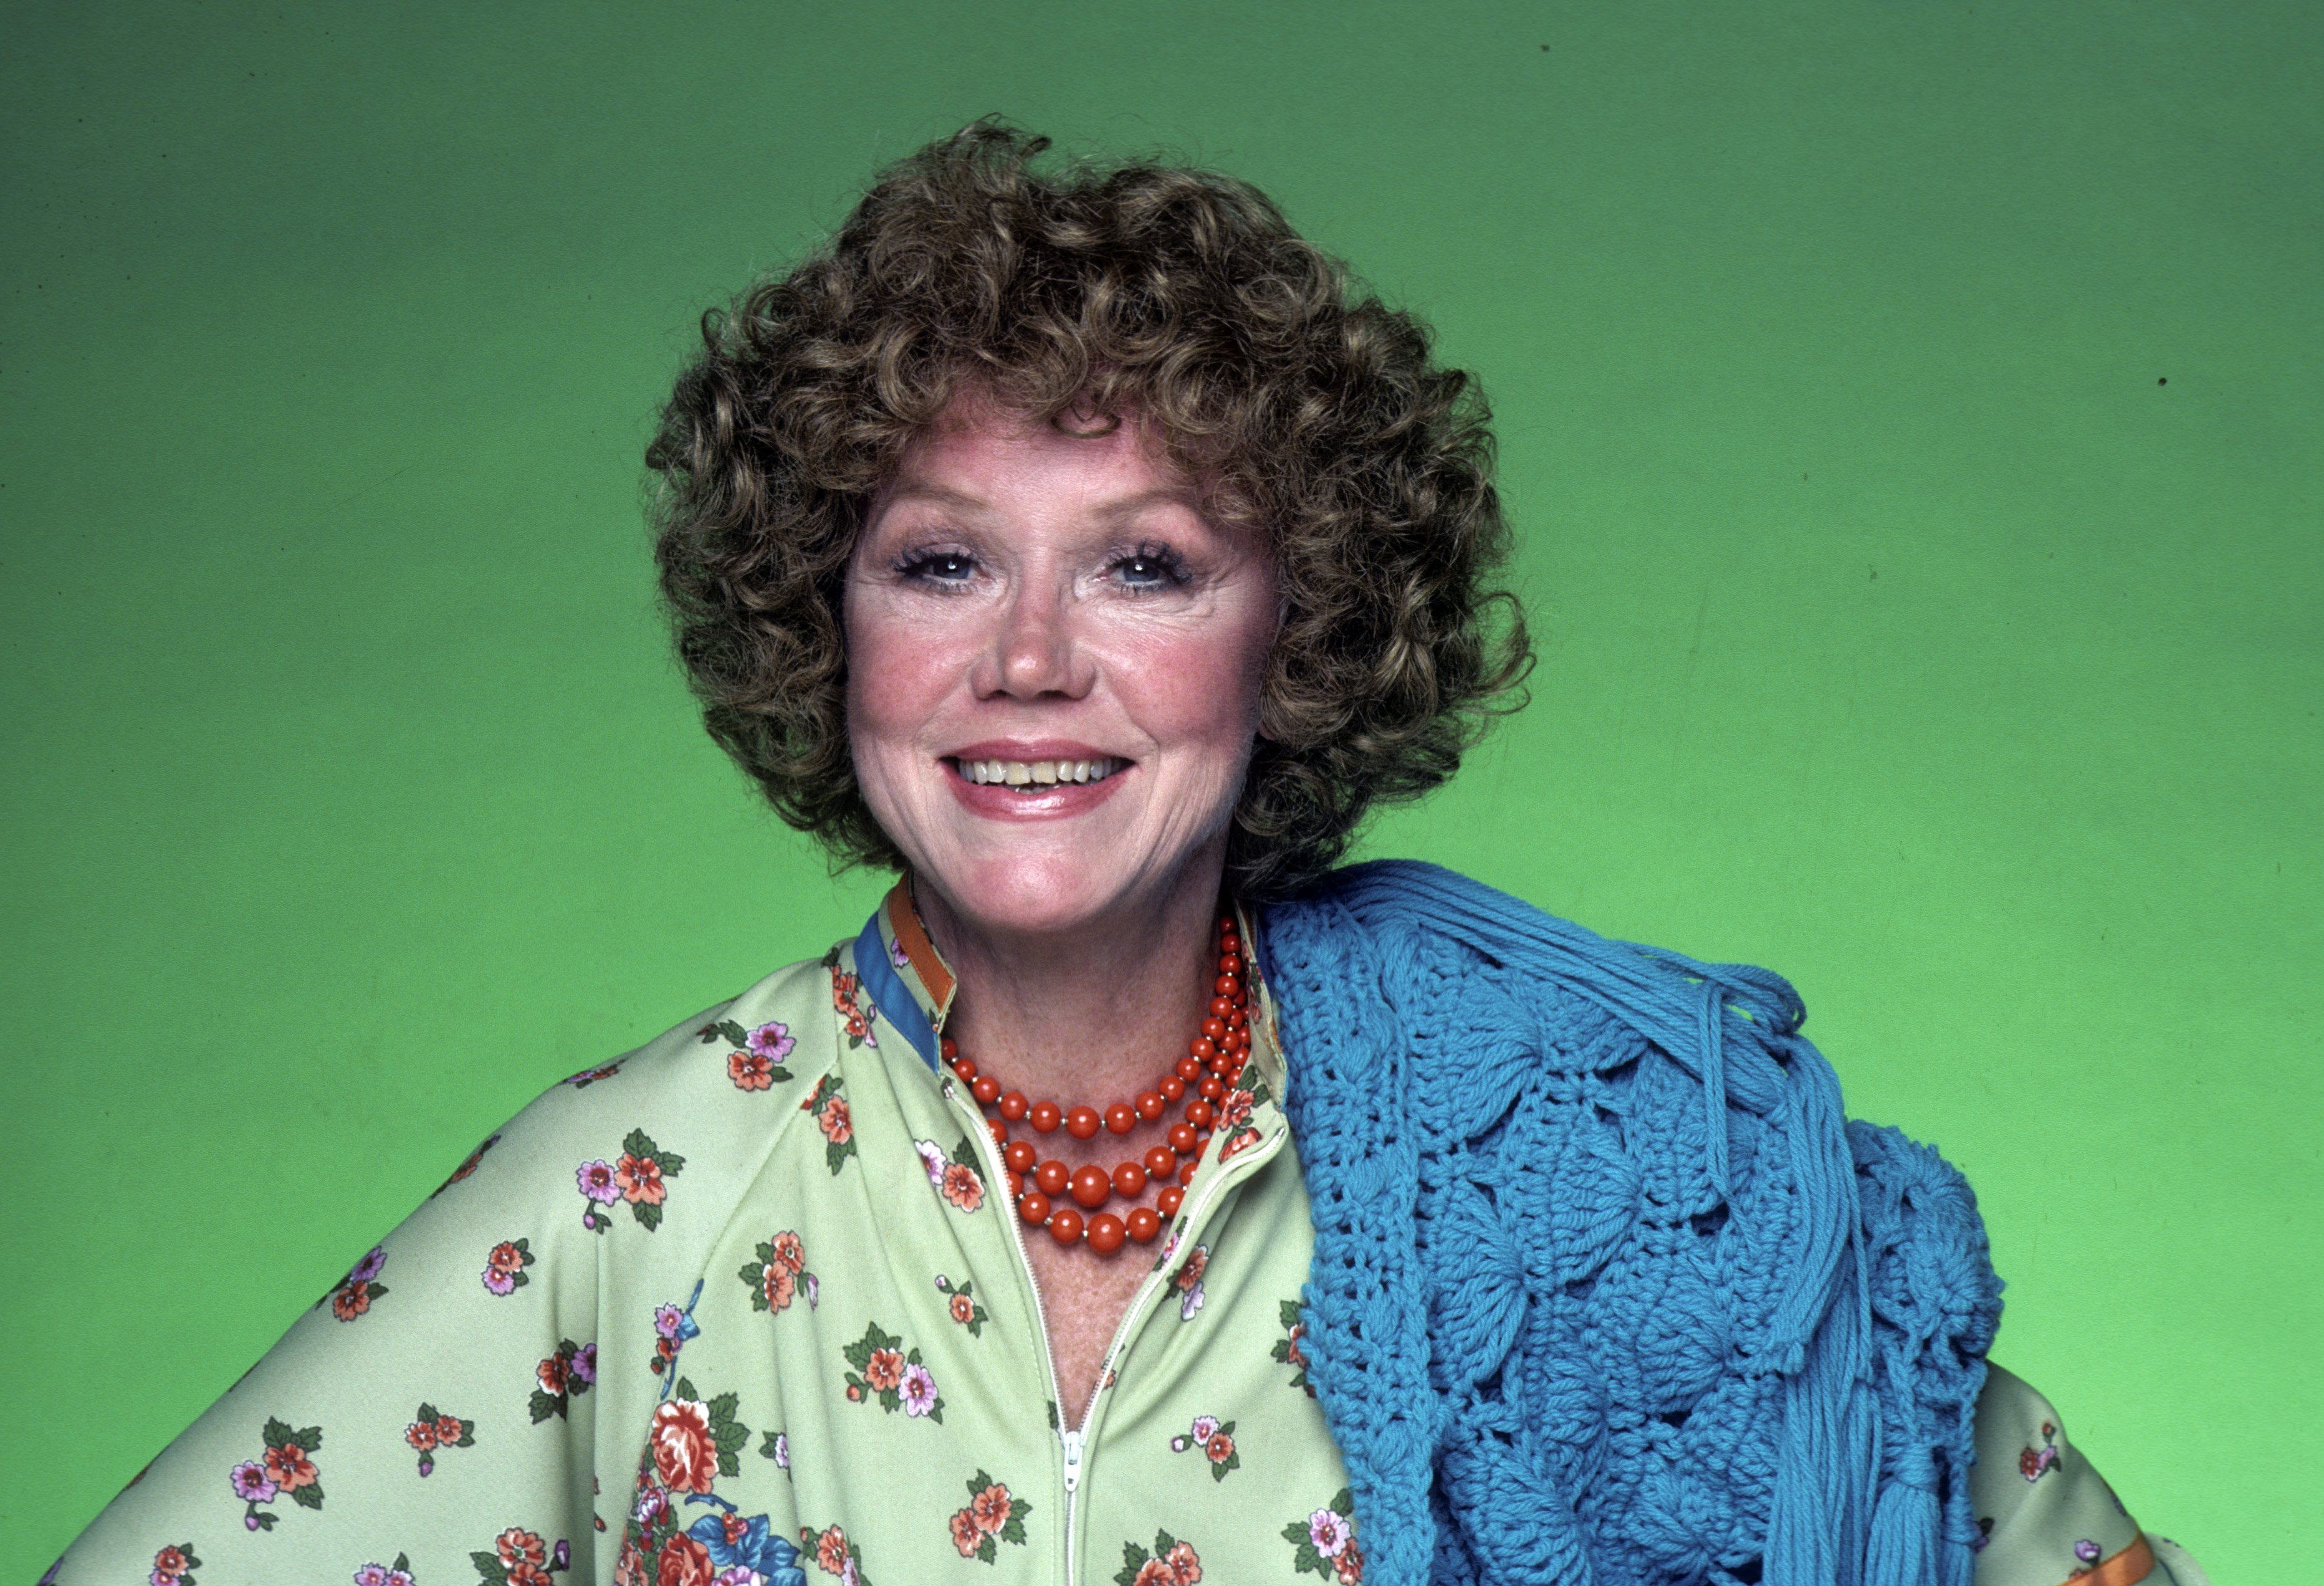 Audra Lindley stands next to a green background